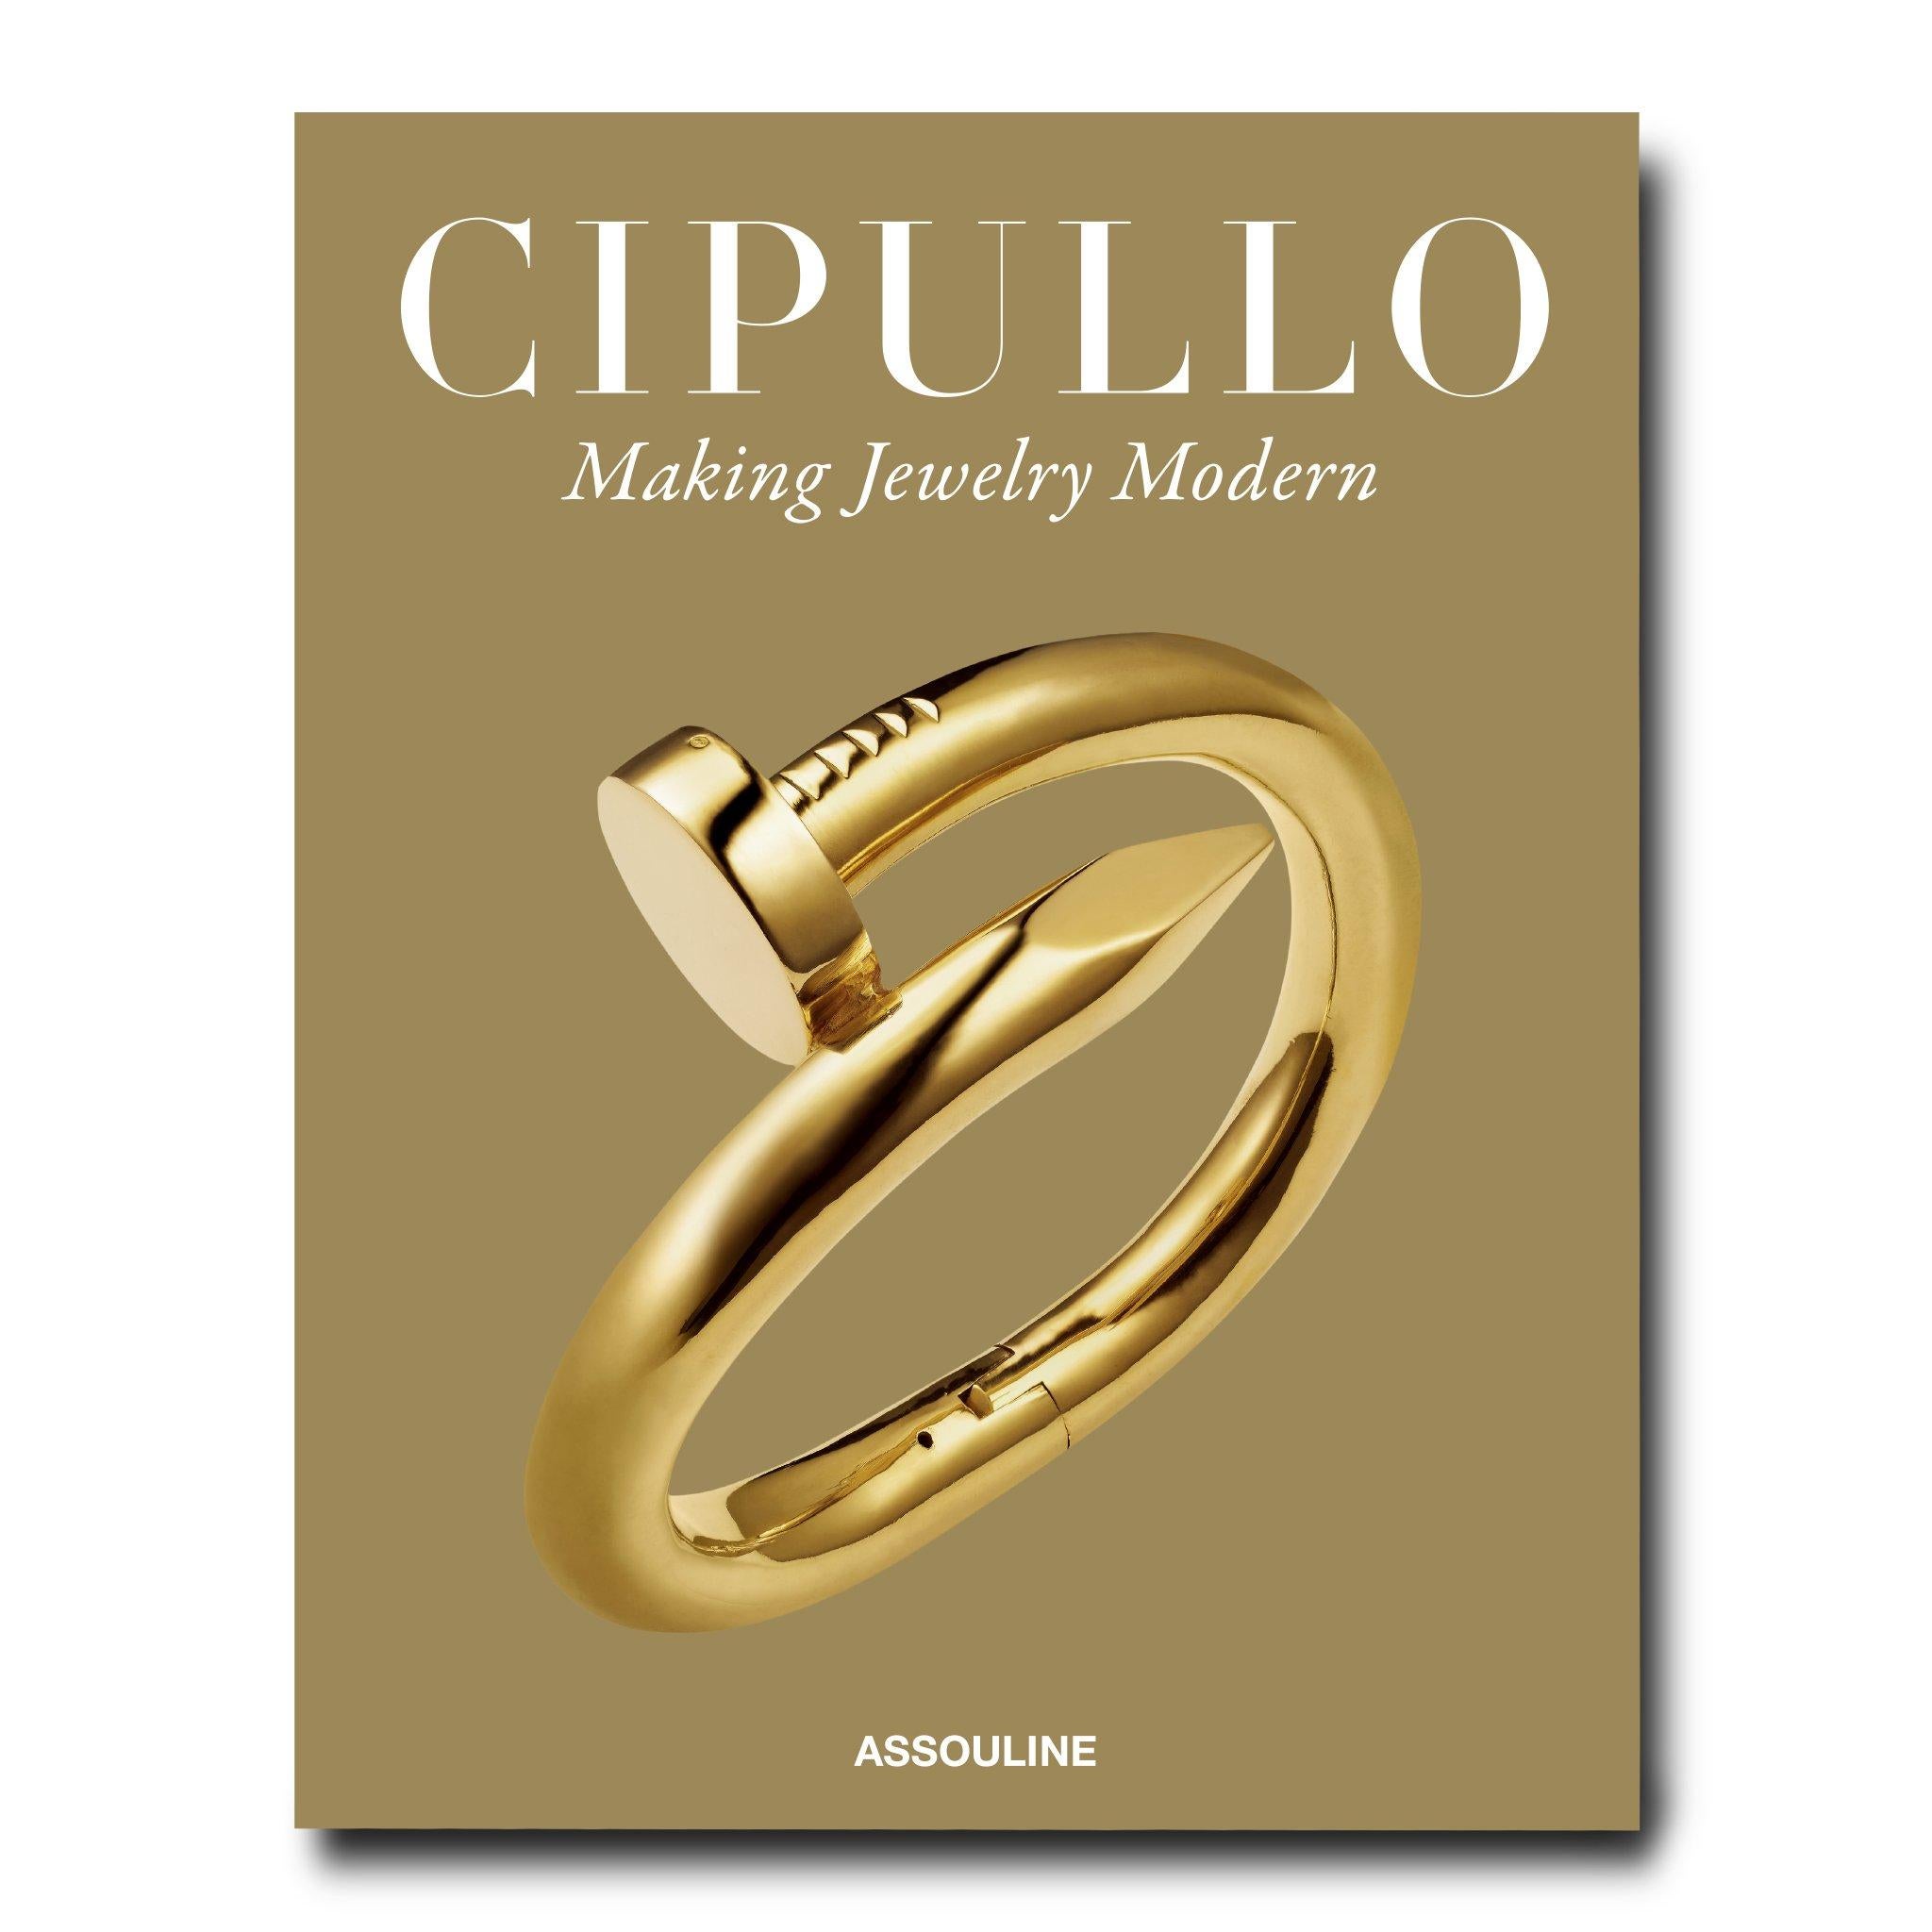 Born in Naples in 1935 to a family of jewelers, Aldo Cipullo became the most glamorous jewelry designer of the 1970s and early 1980s. Aldo left Italy for the exciting possibilities of life in New York City, enrolling at the School of Visual Arts. By